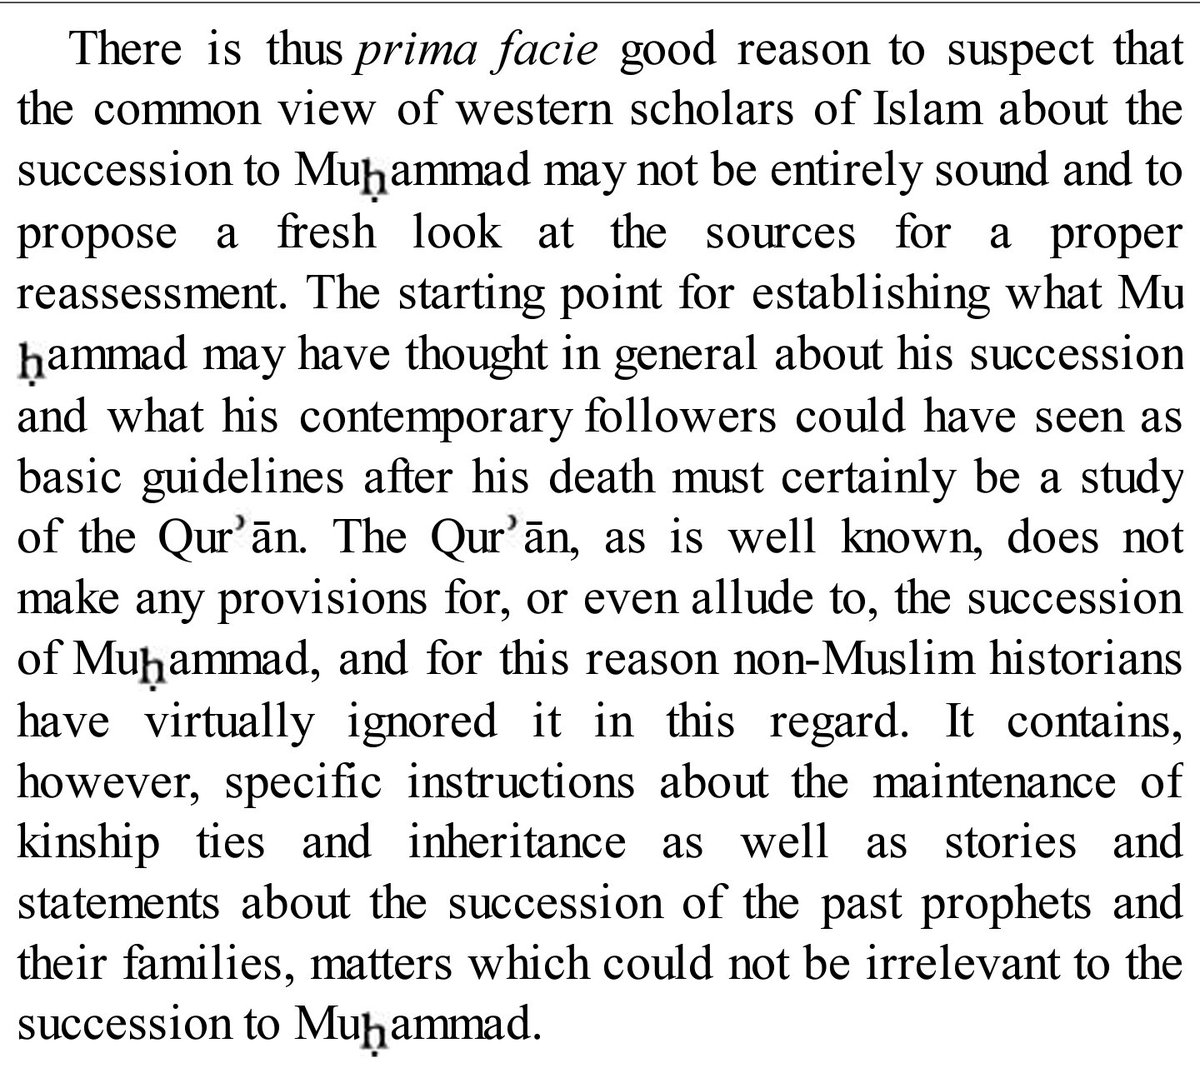 The irony of non-Muslim historians like Wilferd Madelung accepting that studying the Quran is a priority to understand Islamic history while dismissing its verses/tafsir/teachings in the same breath. Foreboding.PS Succession: (5:55) (7:142) (13:43) (17:80) (43:4) to name a few.